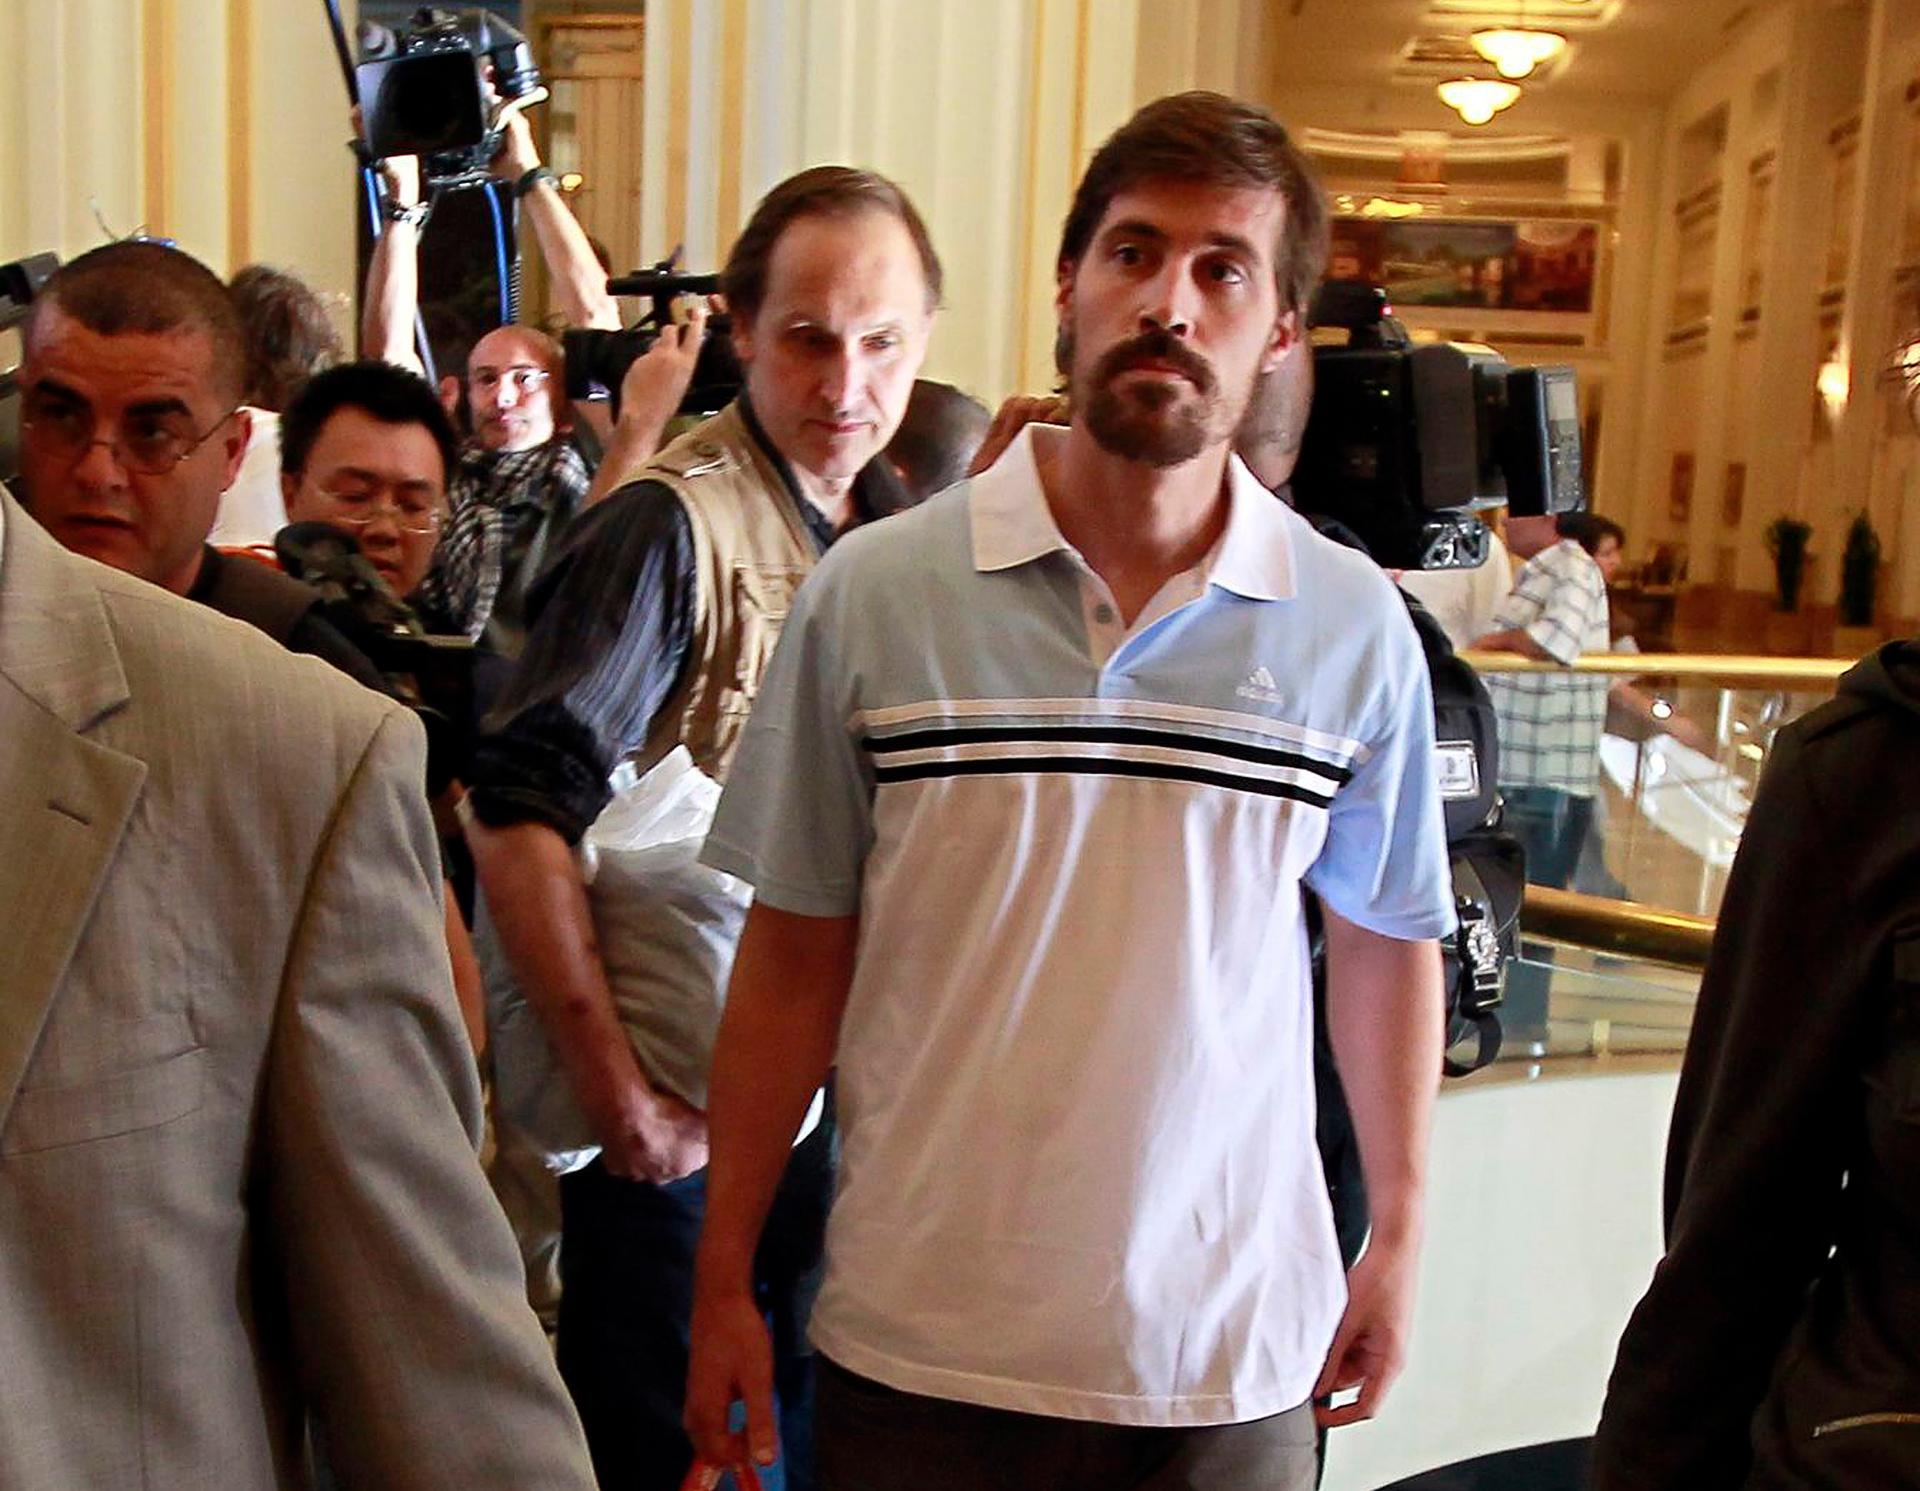 American journalist James Foley arrives at the Rixos hotel in Tripoli after being released from capitivity by the Libyan government on May 18, 2011.